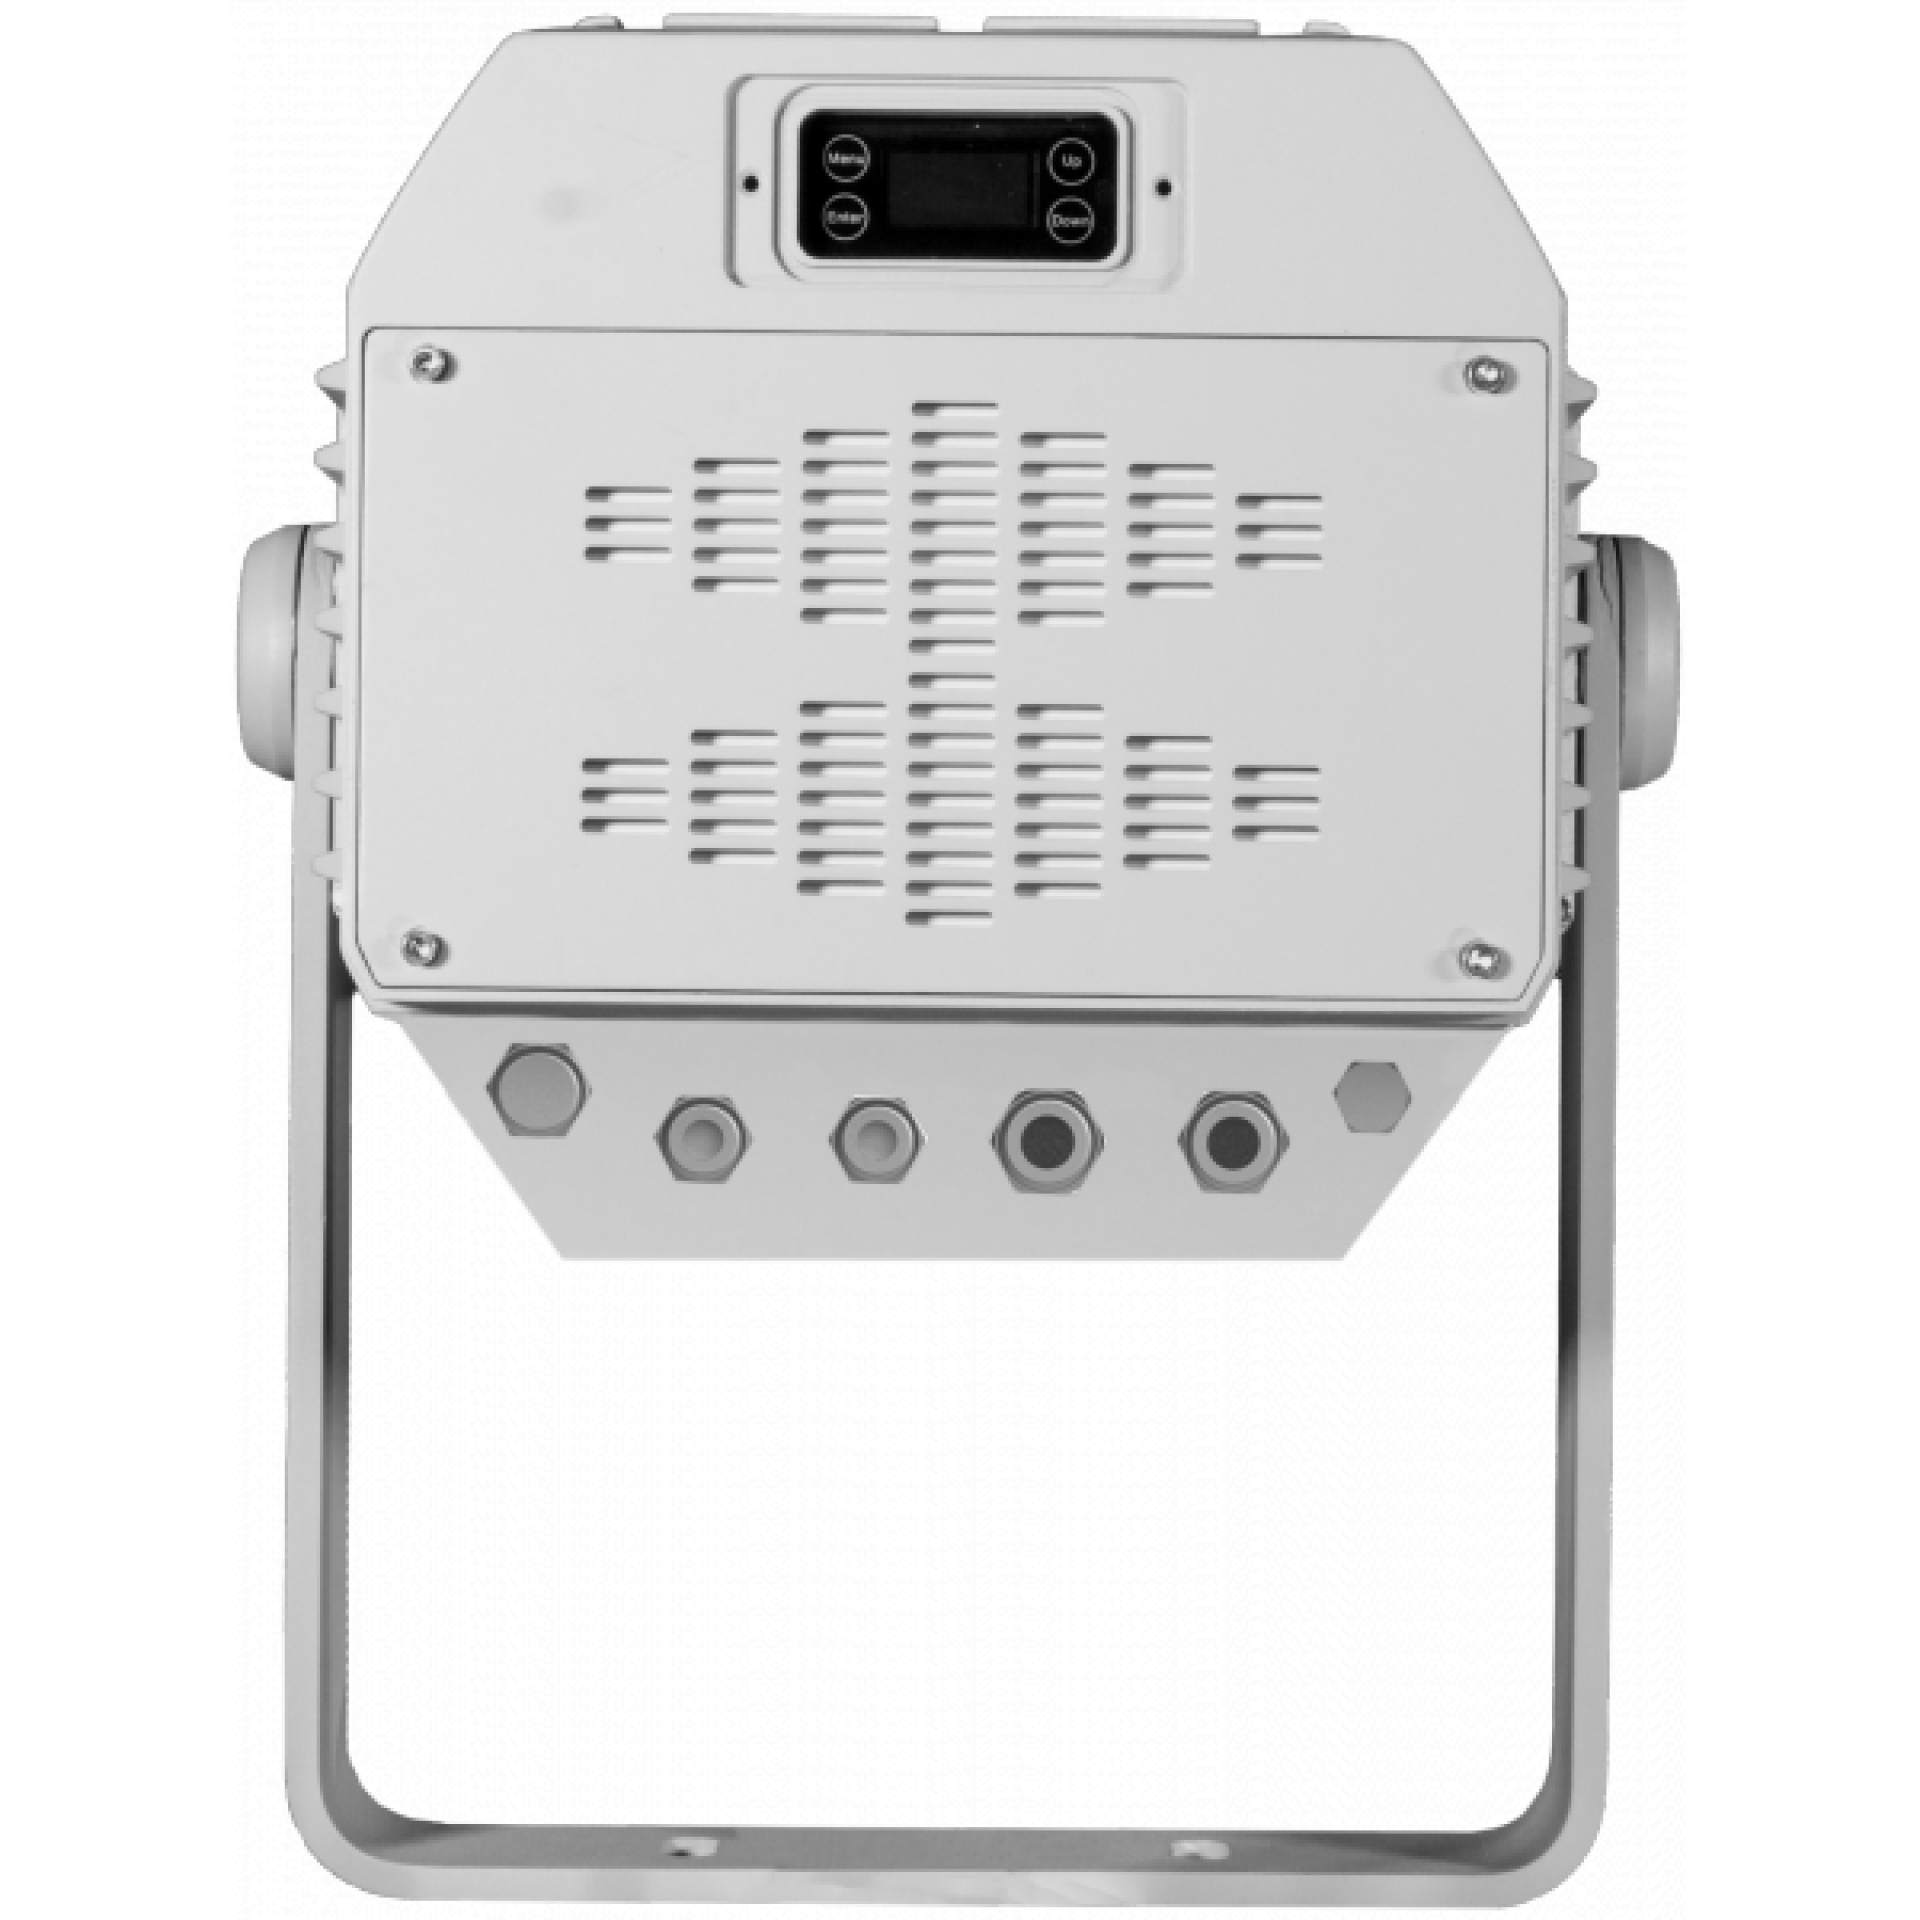 PROLIGHTS Mosaico LED Image Projector - rear view